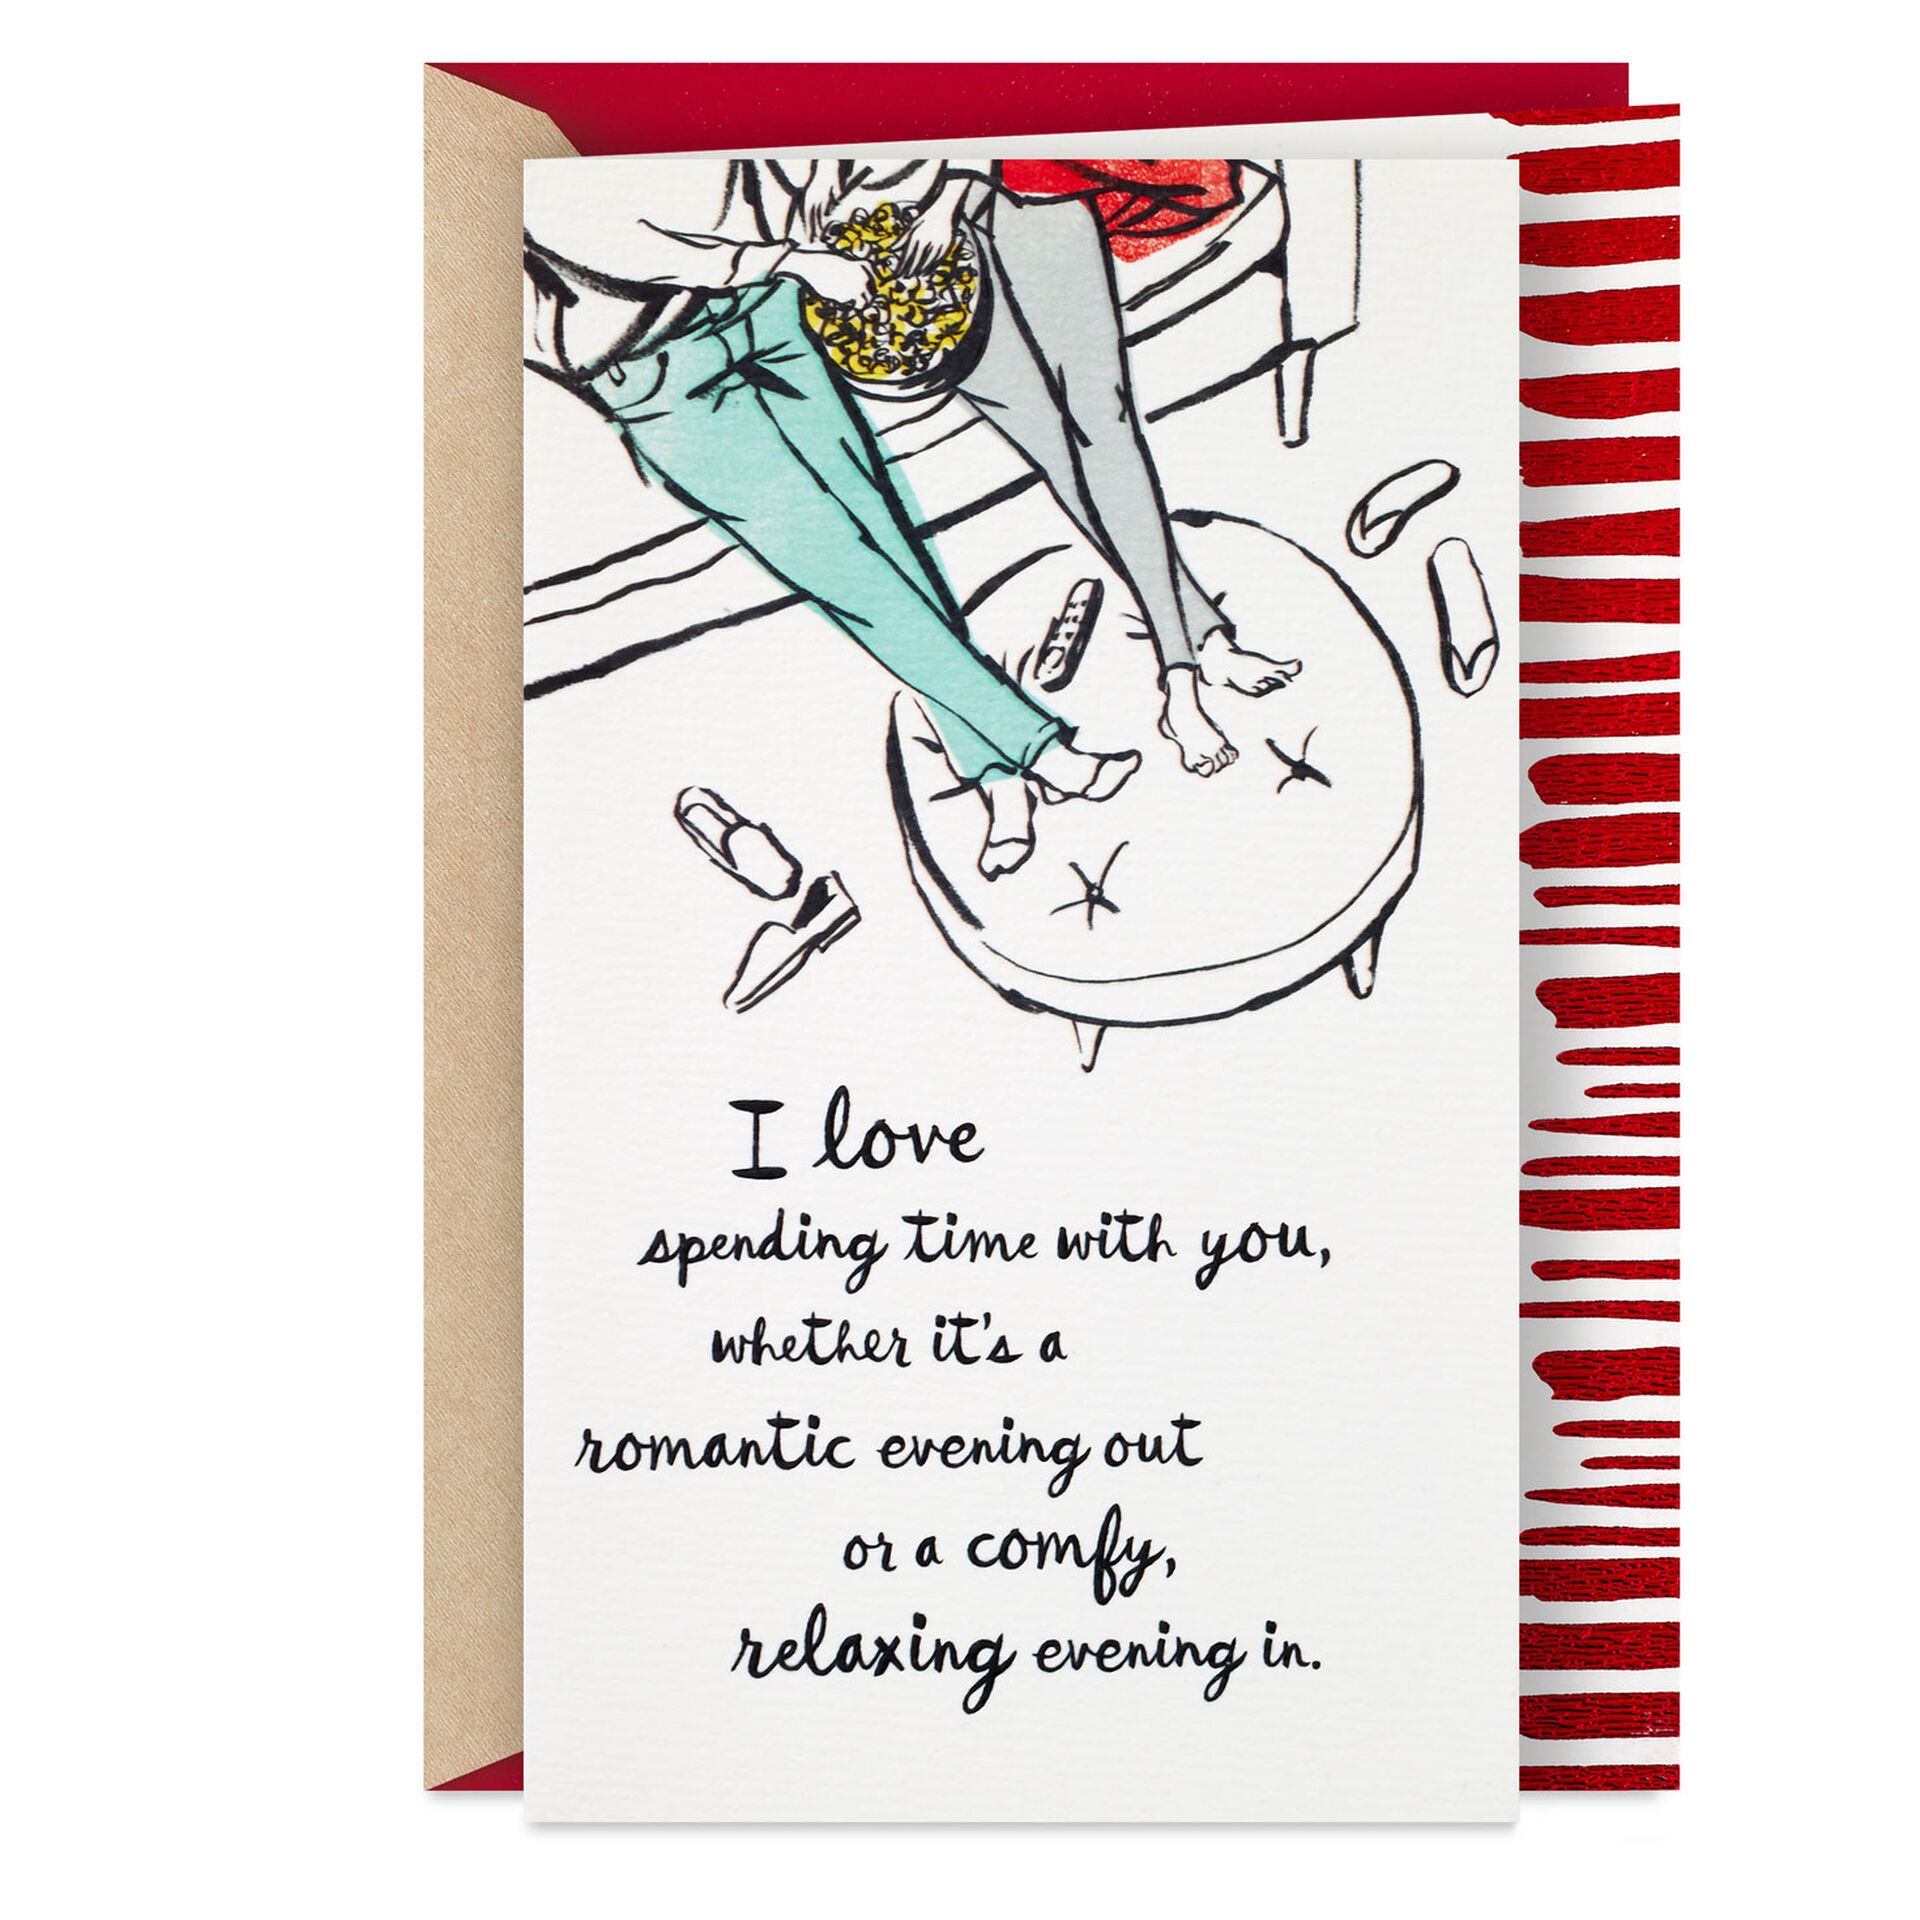 Couple-on-Couch-Romantic-Valentines-Day-Card_559VEE8169_01